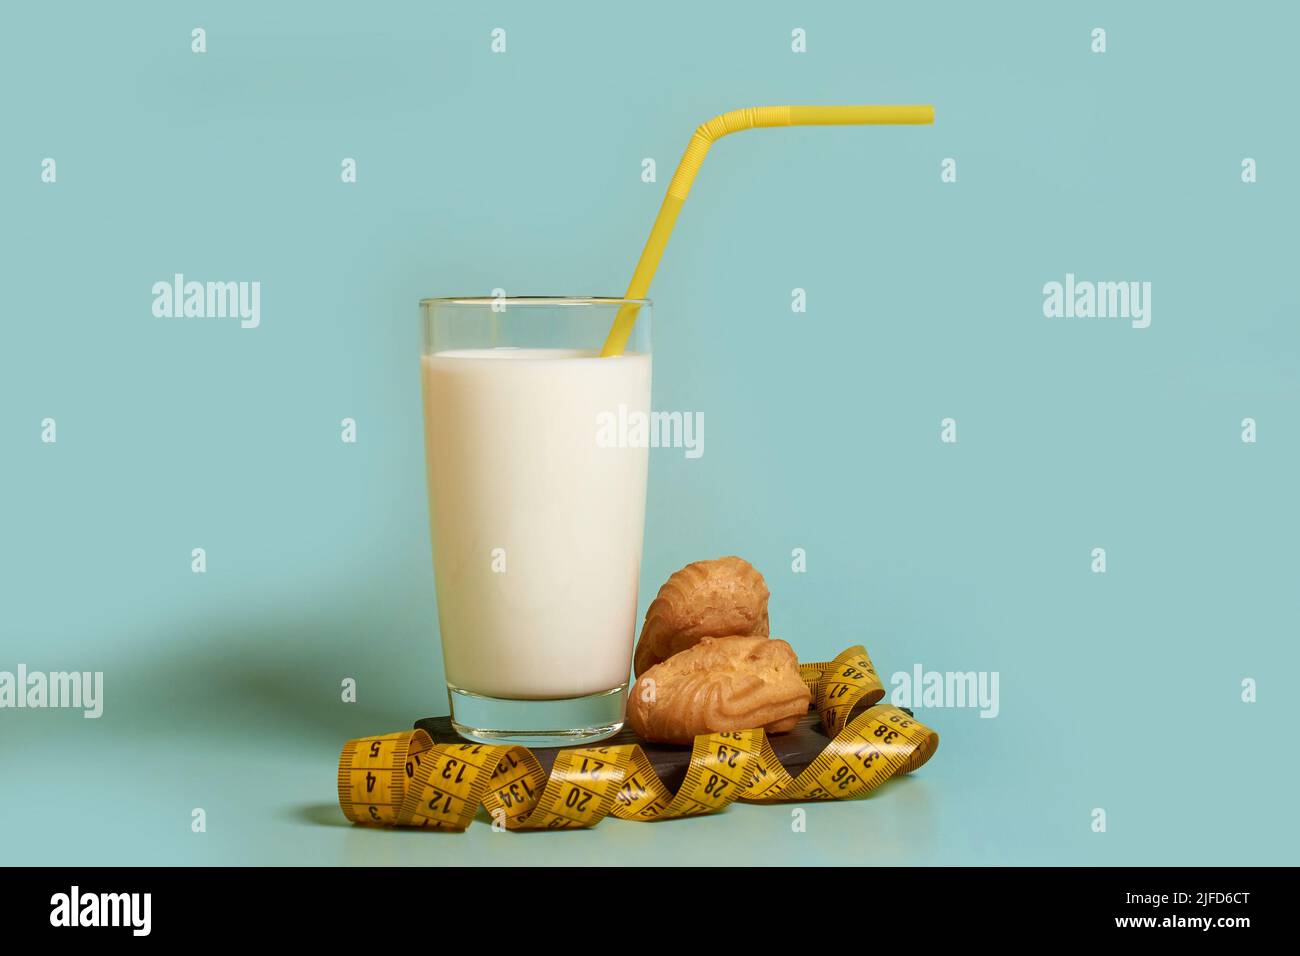 A glass of milk, plastic tube, tailor 's meter and cakes  Stock Photo